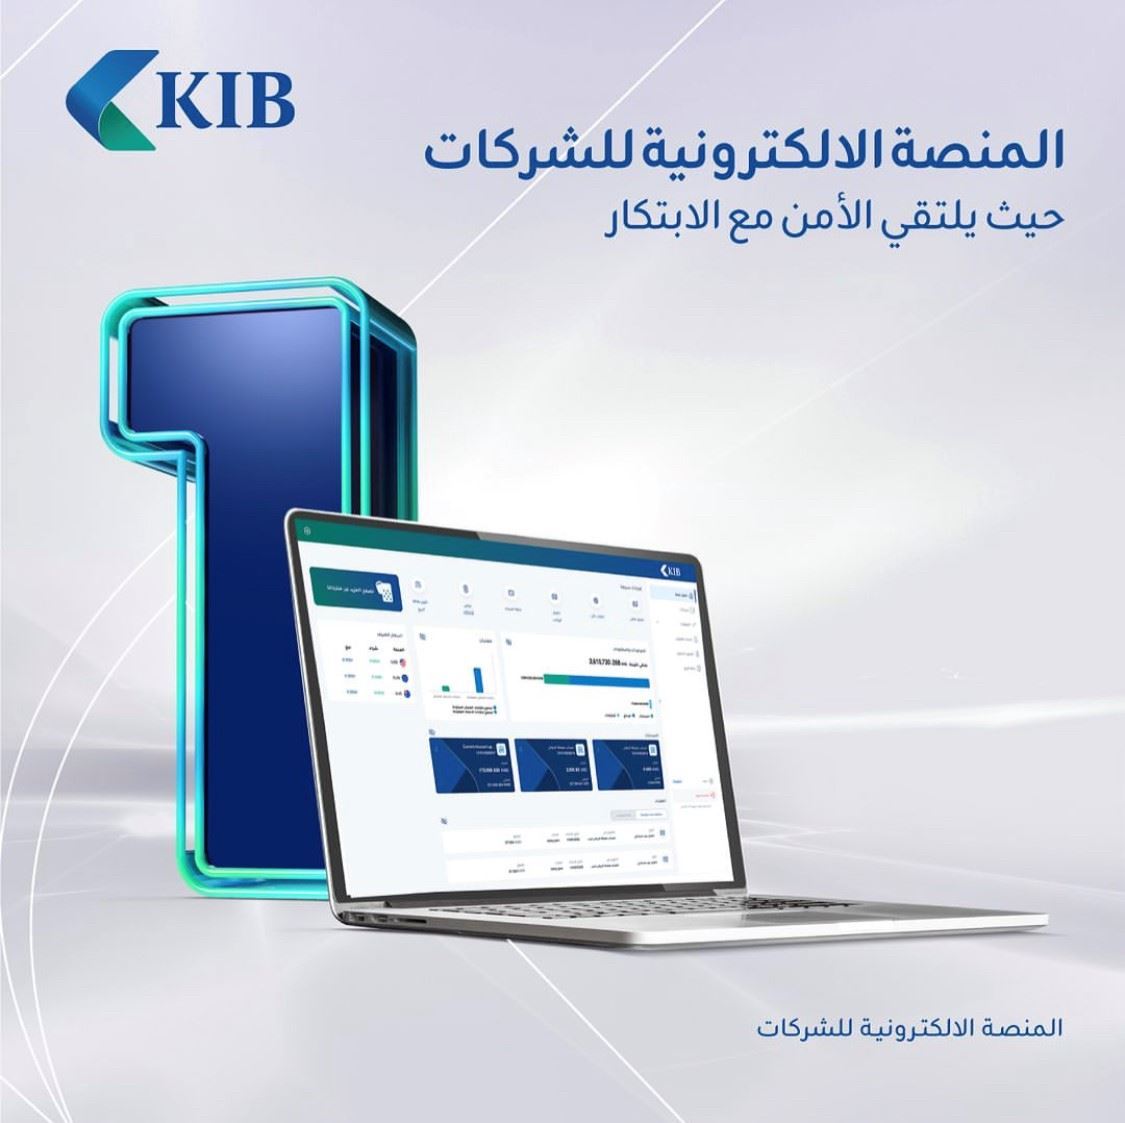 KIB launches all-new state-of-the-art Corporate Online Banking platform